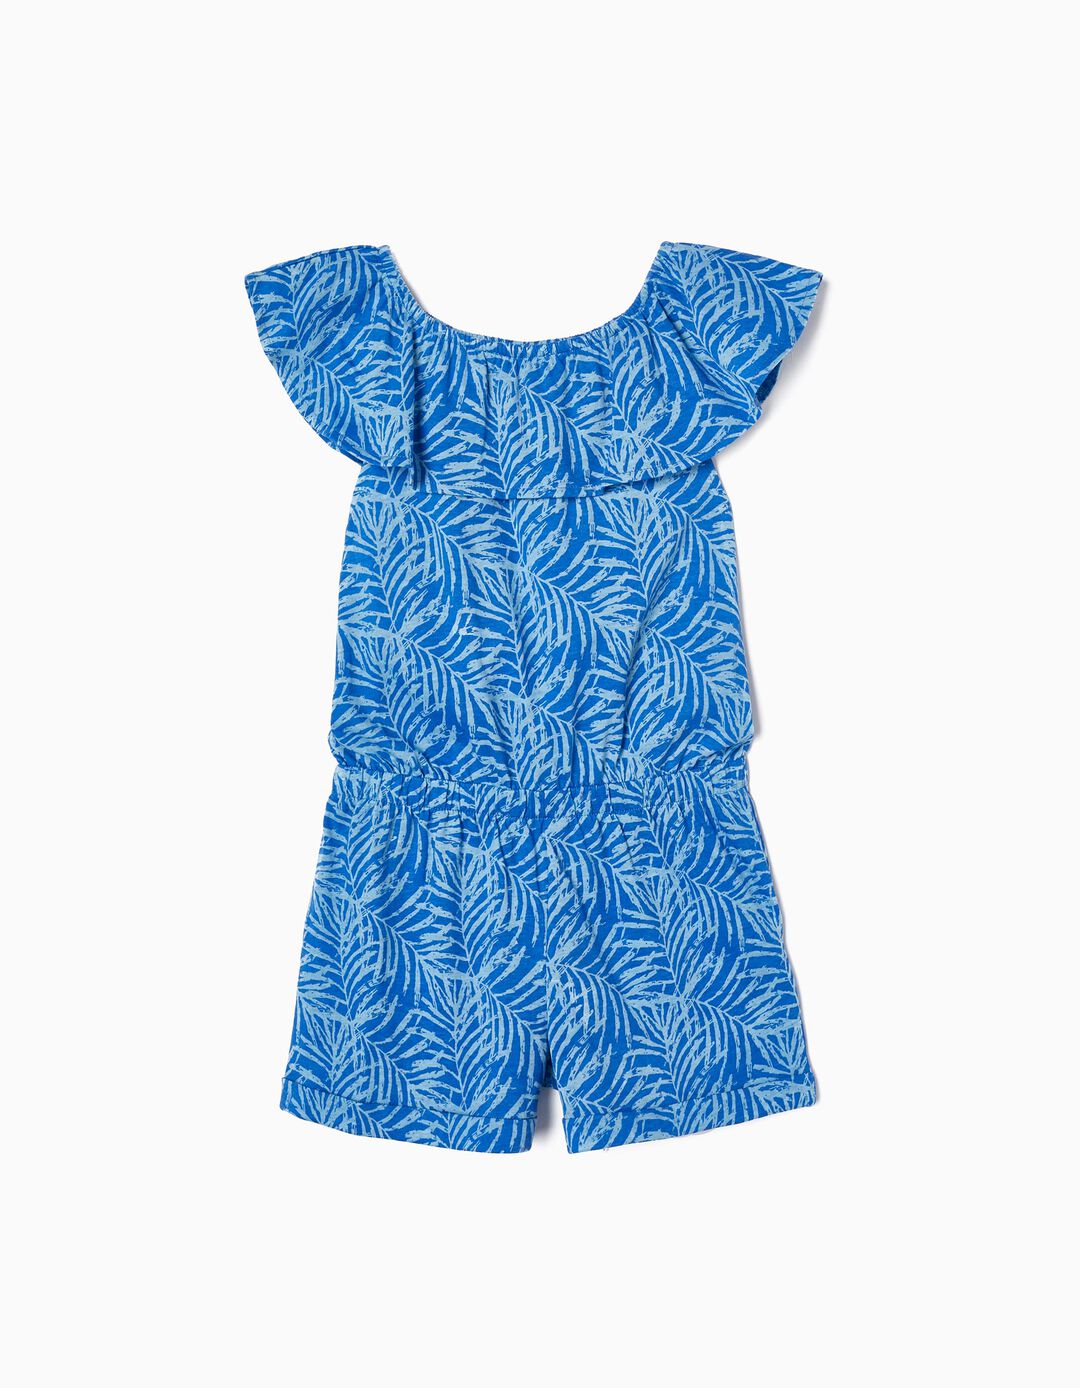 Cotton Jumpsuit with Leaf Print for Girls, Blue